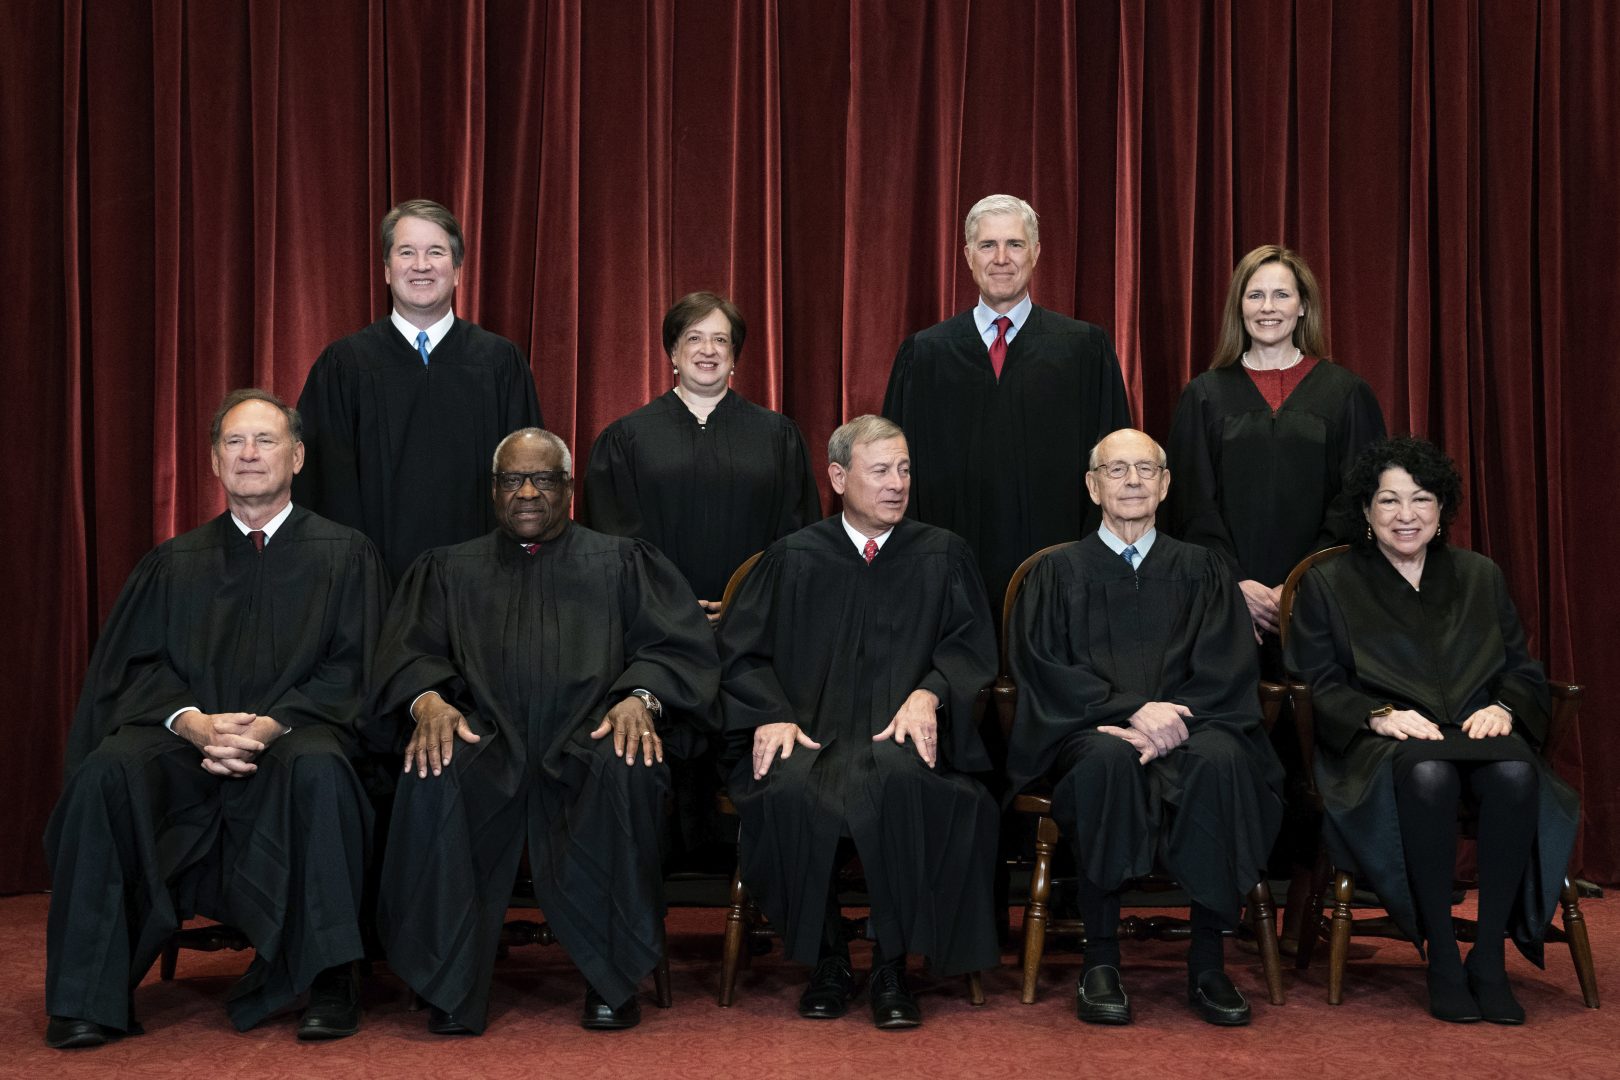 In this April 23, 2021, file photo, members of the Supreme Court pose for a group photo at the Supreme Court in Washington. Seated from left are Associate Justice Samuel Alito, Associate Justice Clarence Thomas, Chief Justice John Roberts, Associate Justice Stephen Breyer and Associate Justice Sonia Sotomayor, while standing from left are Associate Justice Brett Kavanaugh, Associate Justice Elena Kagan, Associate Justice Neil Gorsuch and Associate Justice Amy Coney Barrett. (Erin Schaff/The New York Times via AP, Pool)